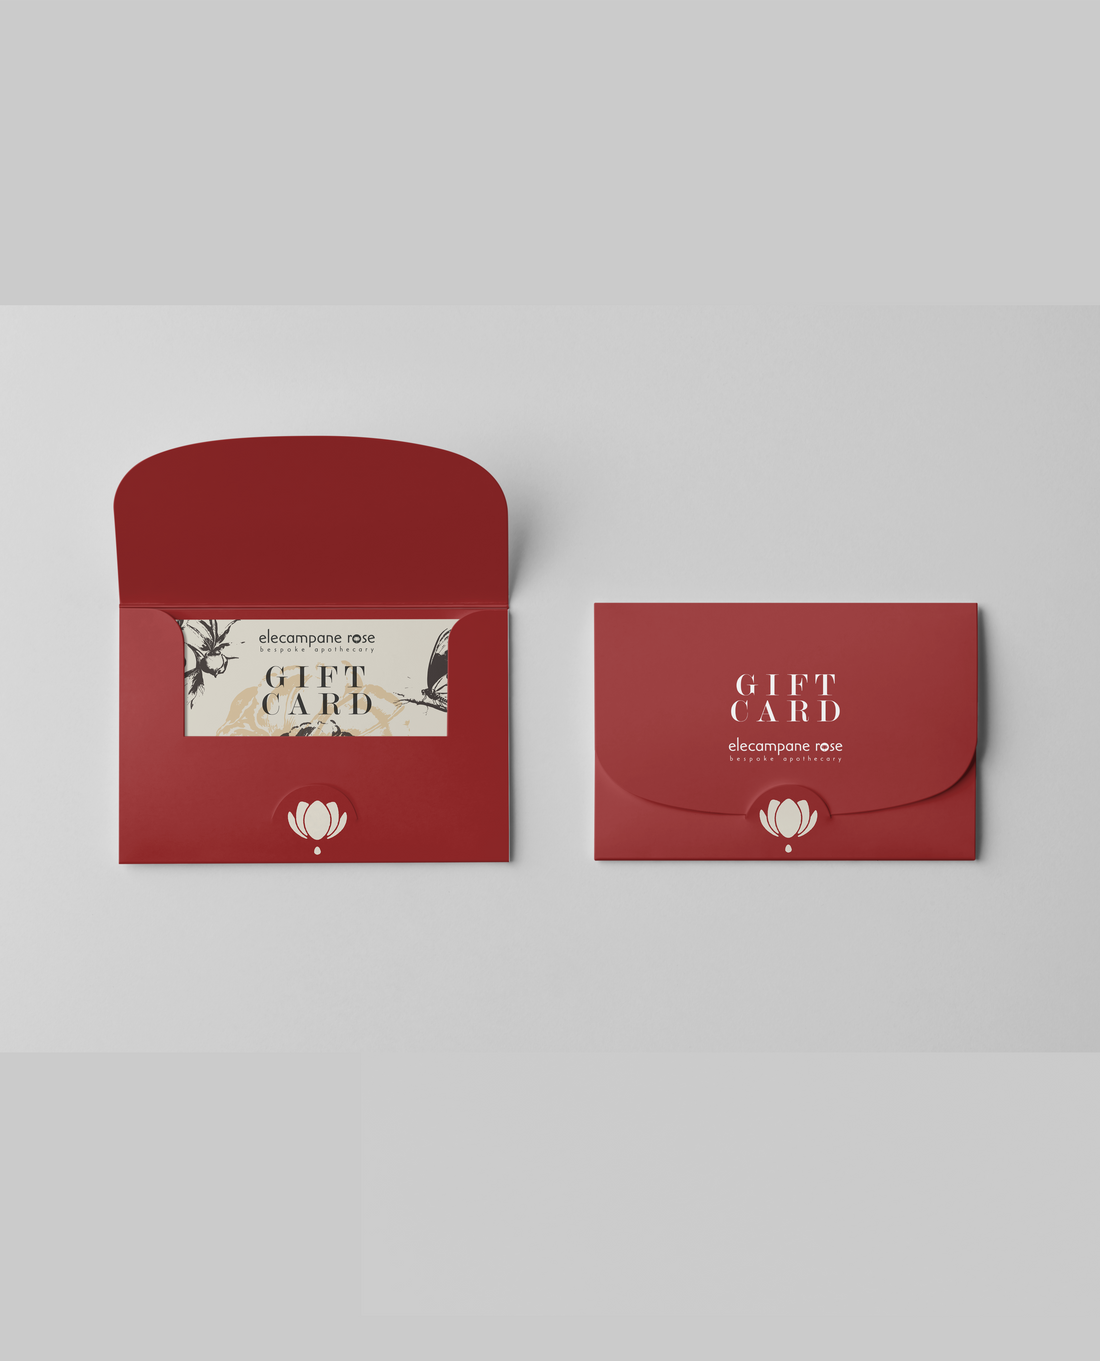 Gift card holder open on left and closed on red in a red and beige color scheme.